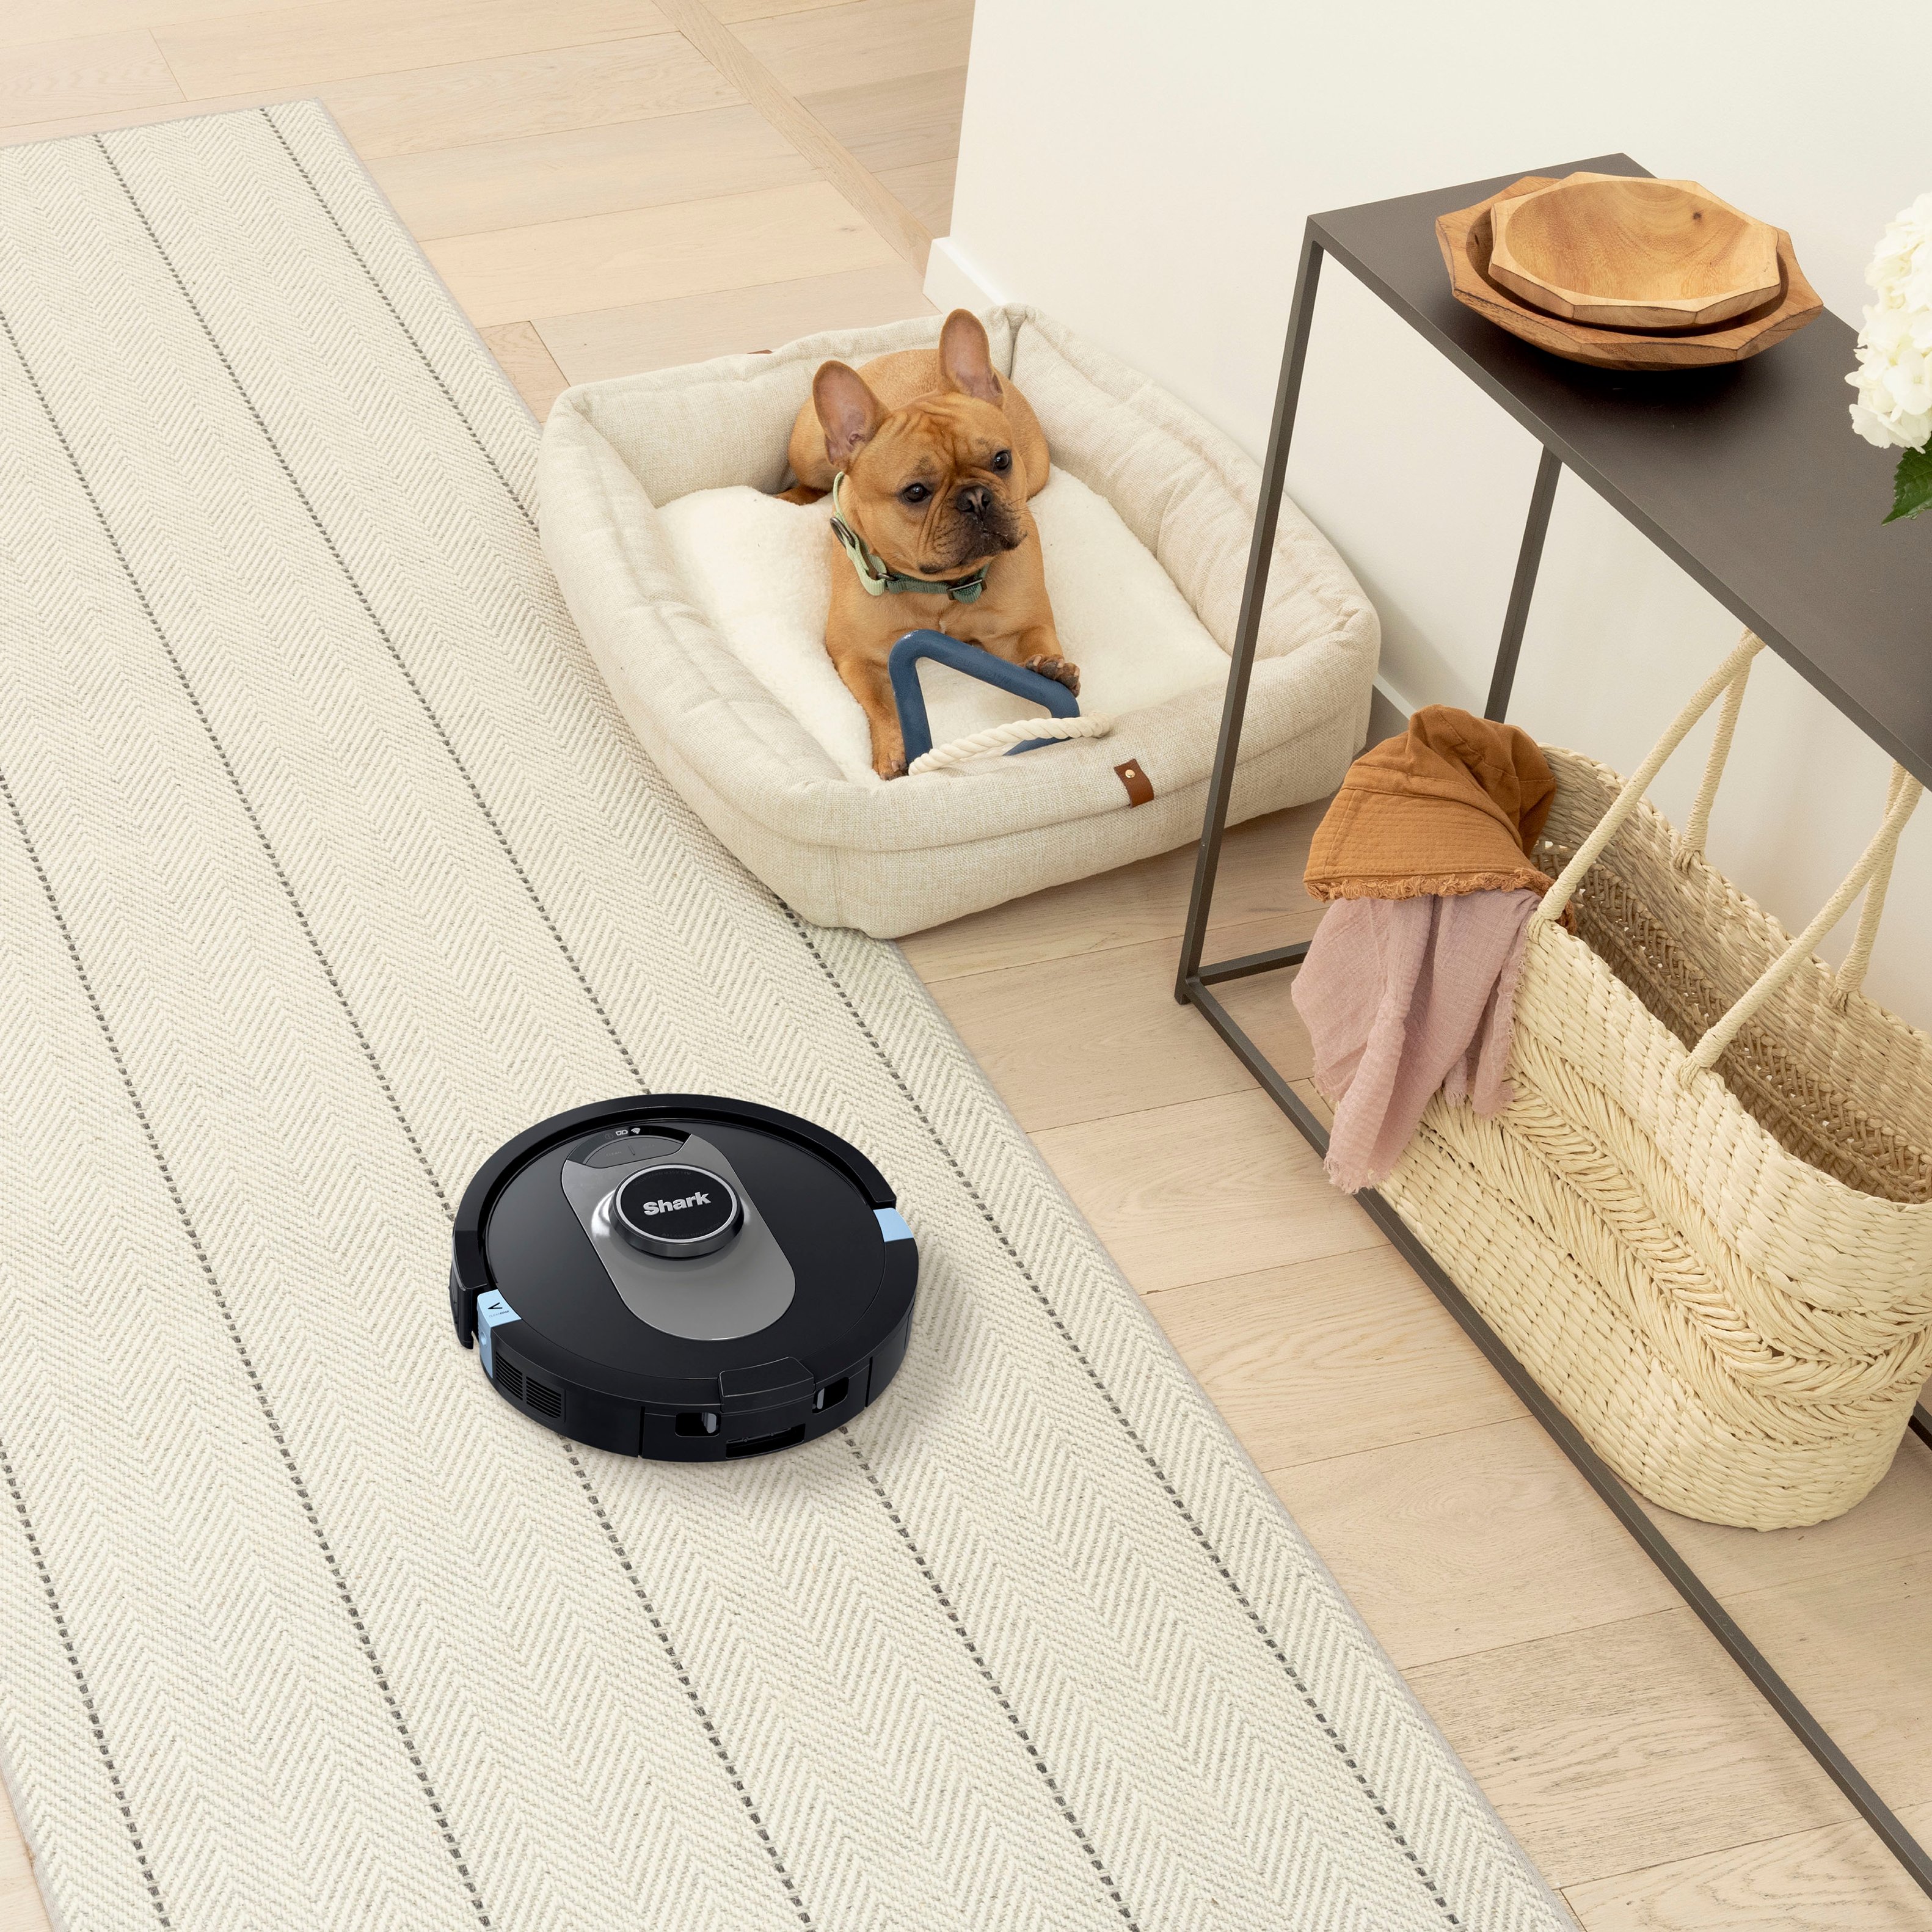 Shark AI Ultra with Base, HEPA Best Matrix Buy Empty Connected WiFI Vacuum - Clean, RV2502AE Bagless Home Black Robot Self Mapping